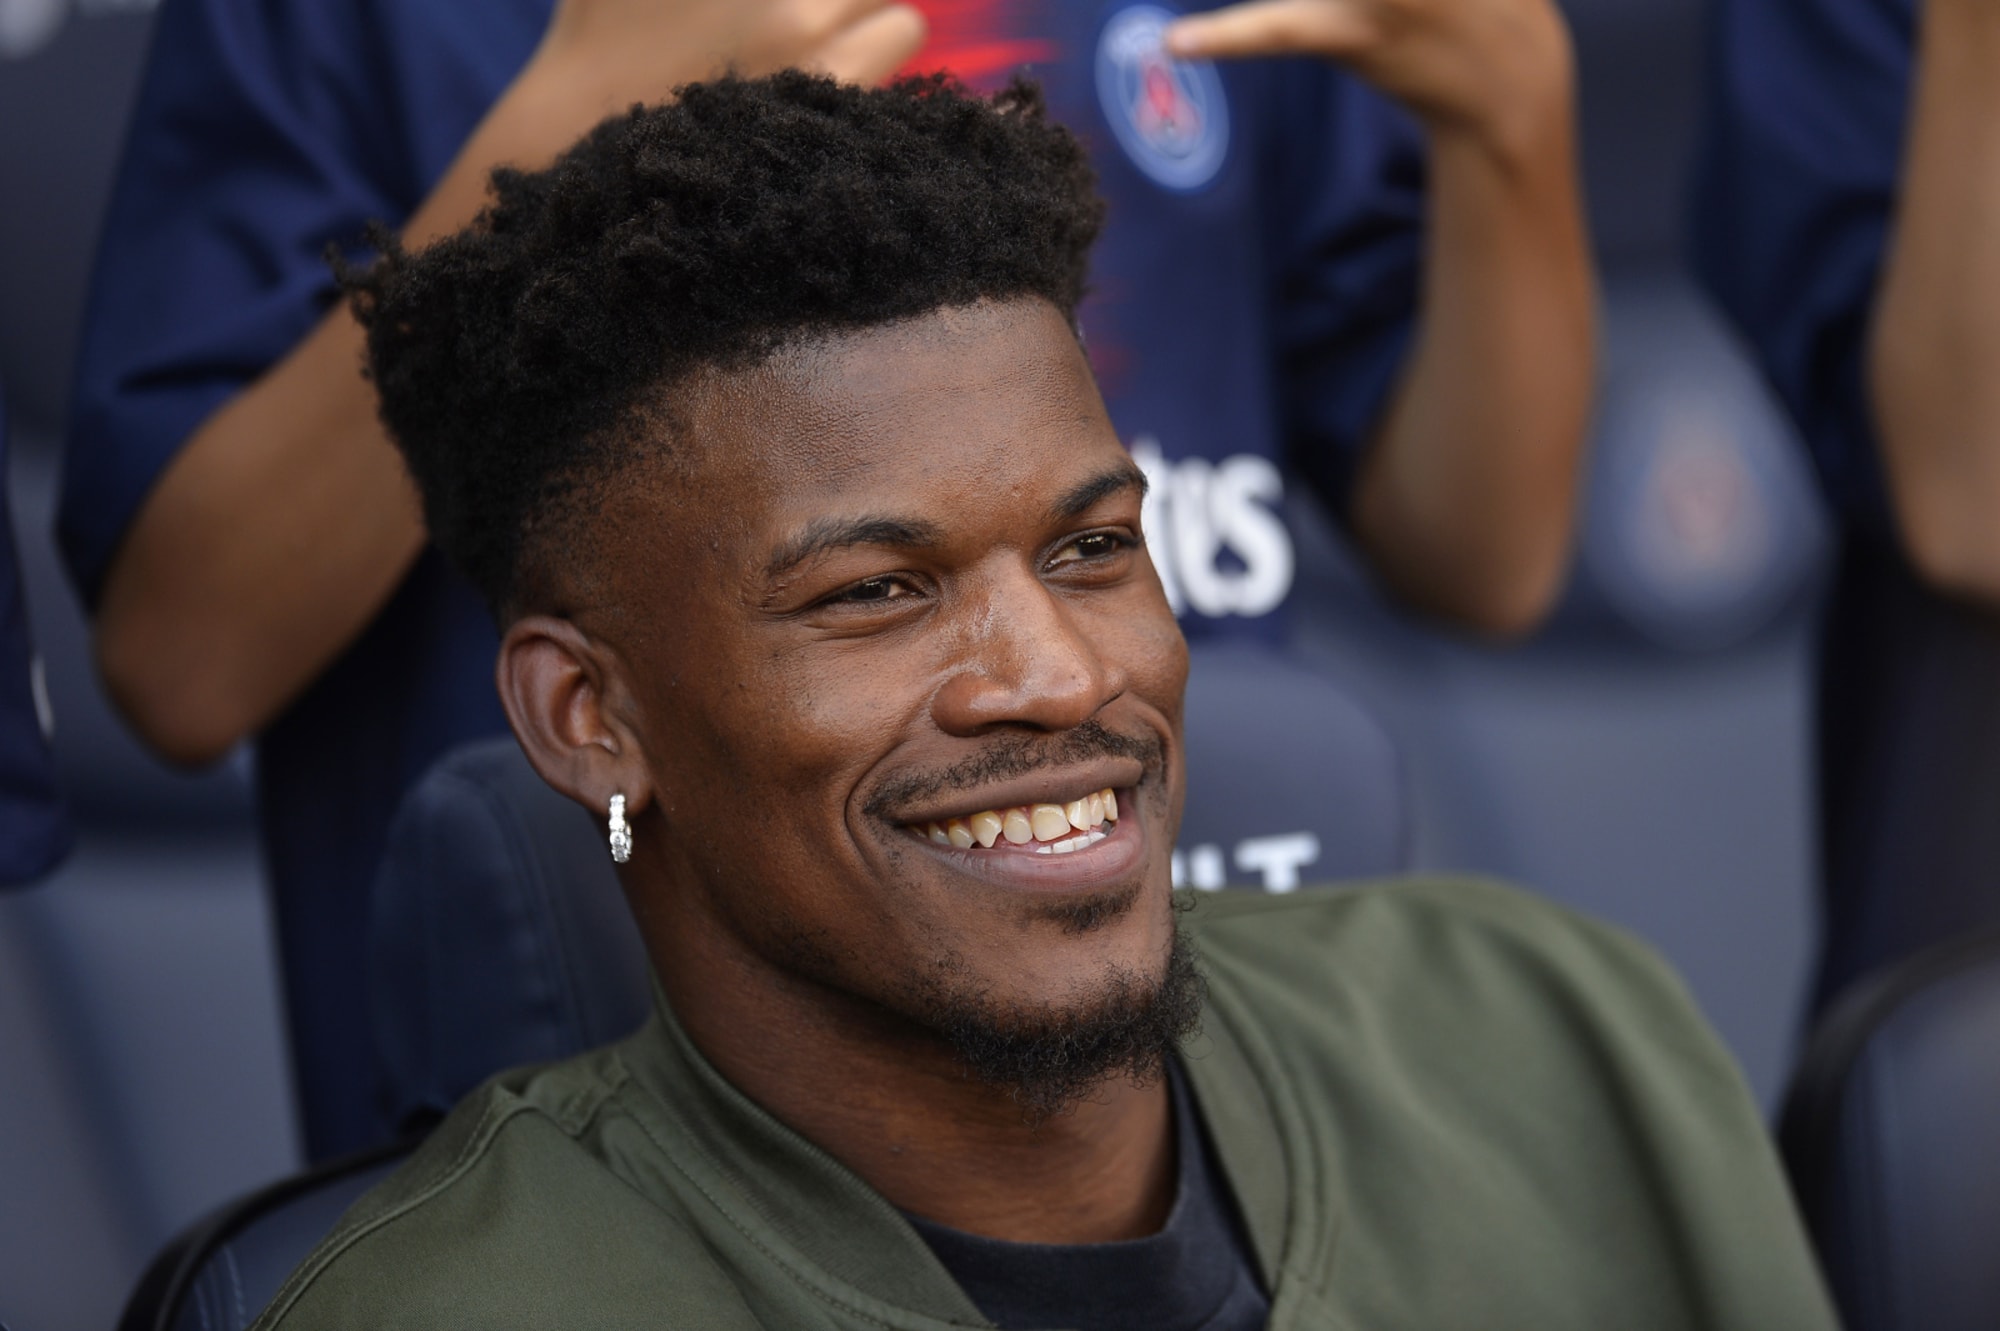 Column: As Clippers consider Jimmy Butler trade, they'd better not